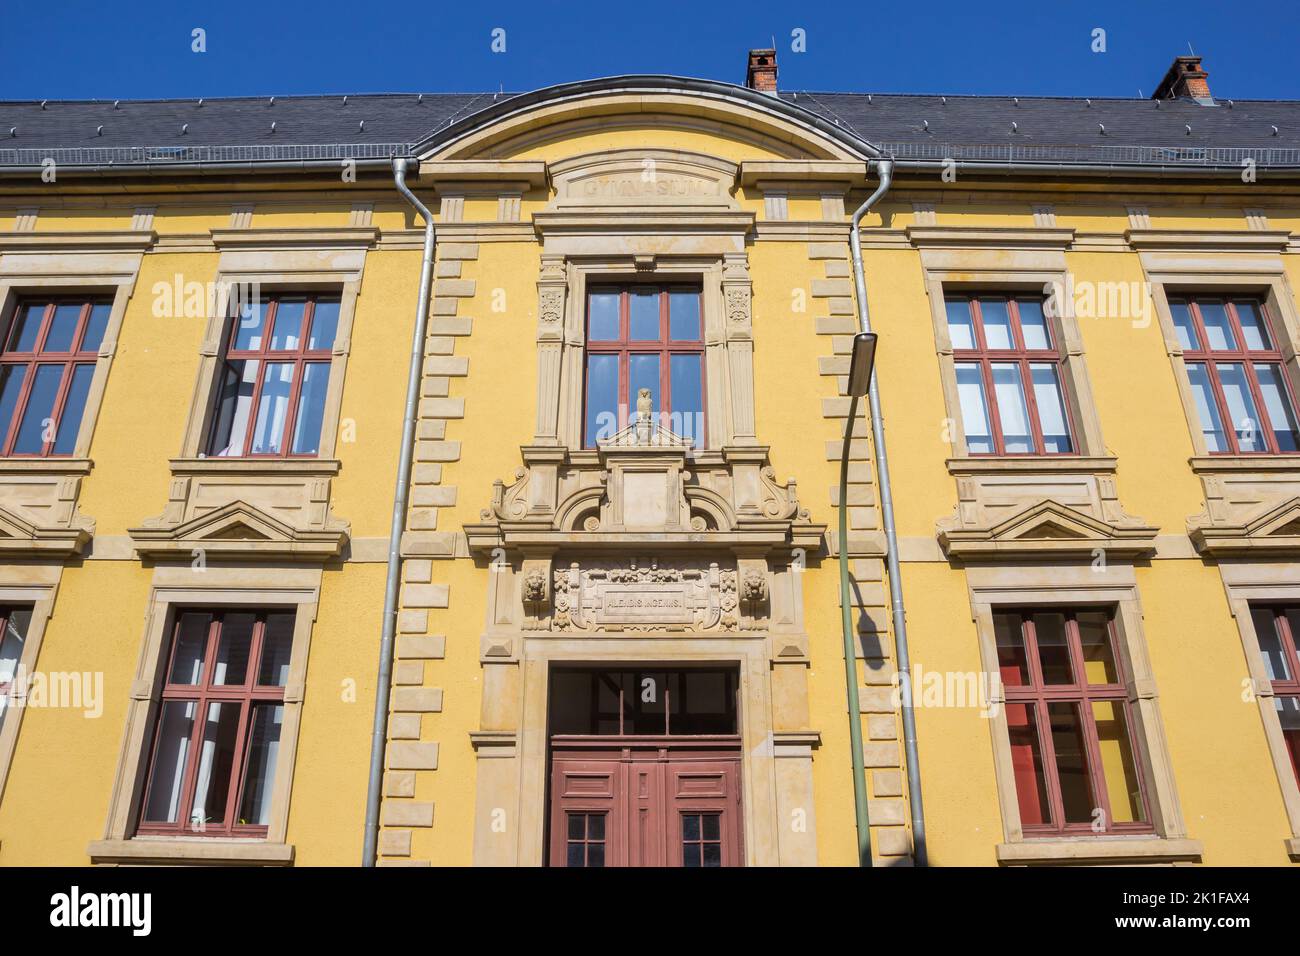 Yellow facade of a historic building in Helmstedt, Germany Stock Photo